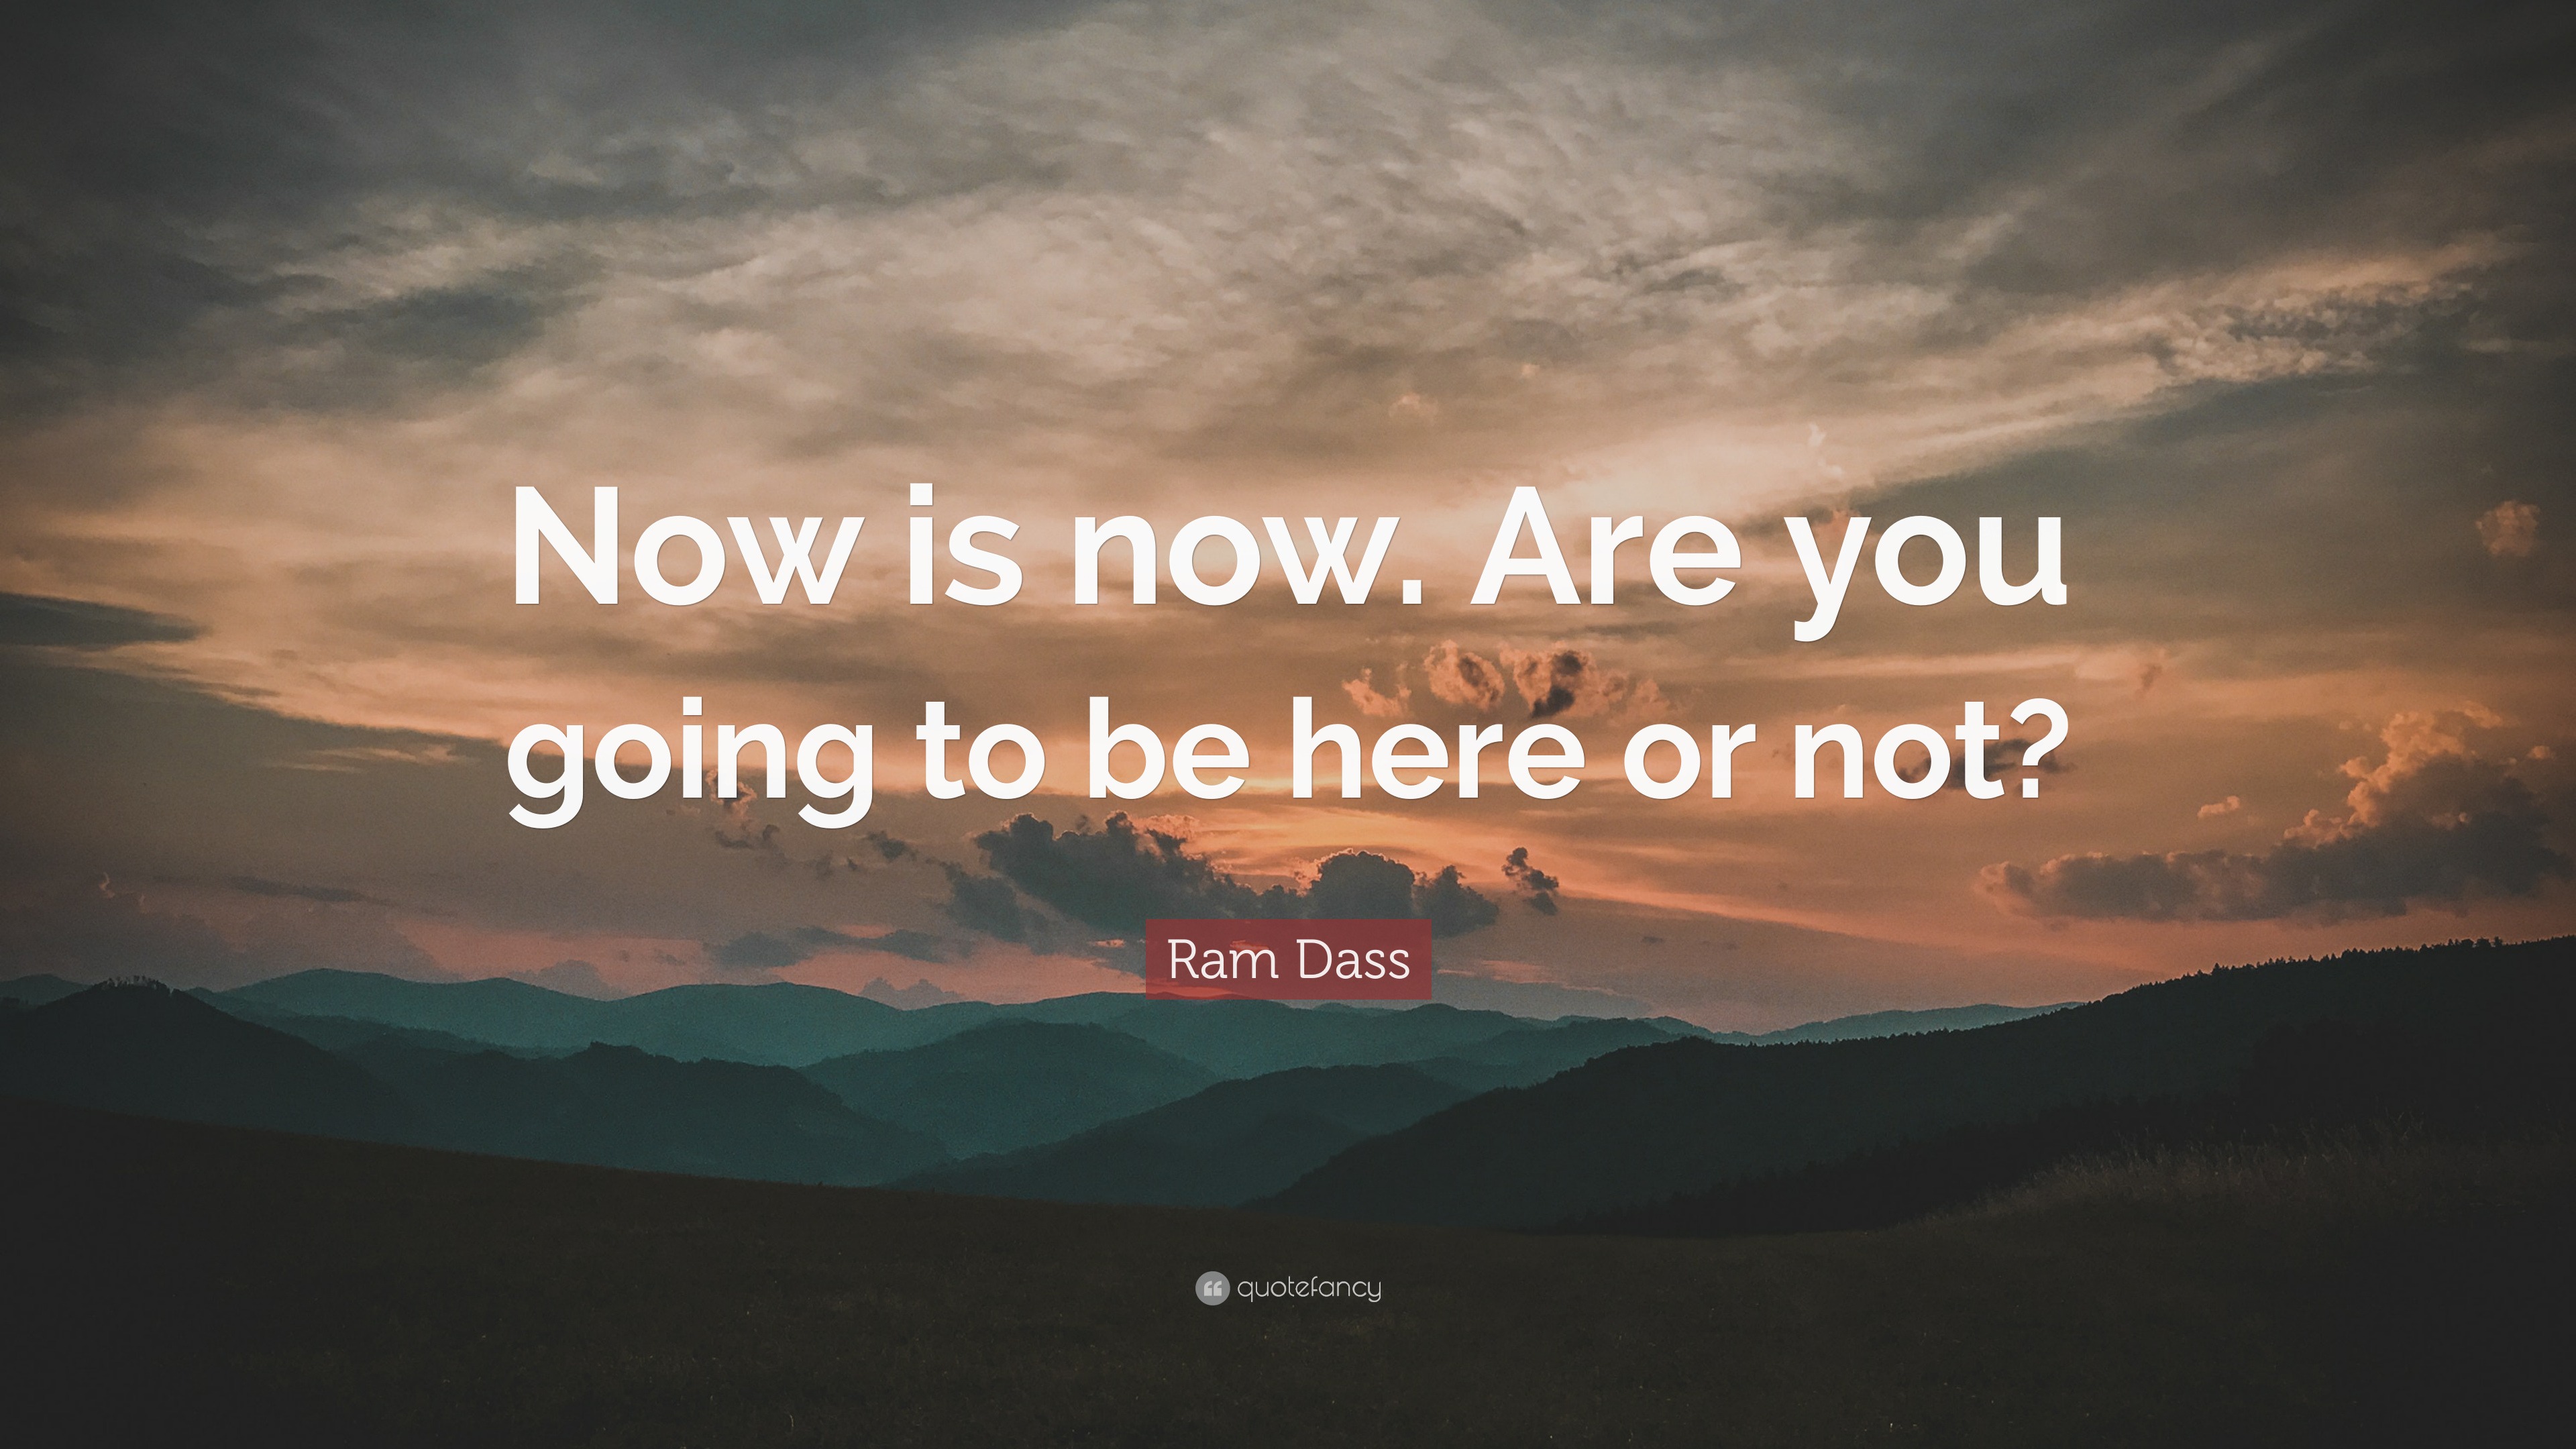 Ram Dass Quote “now Is Now Are You Going To Be Here Or Not”